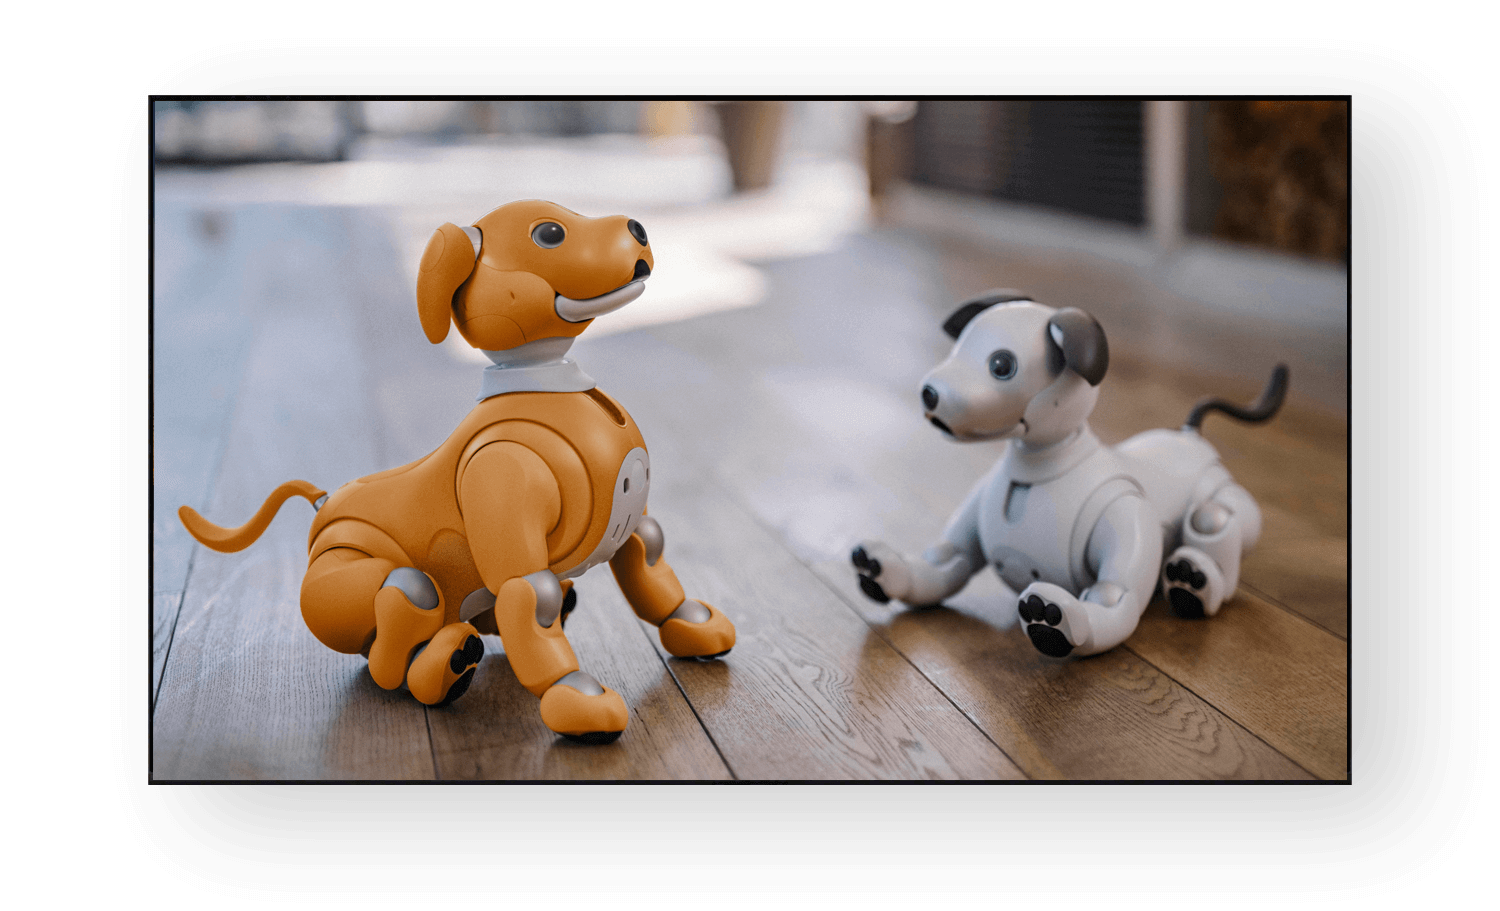 aibo：My story with aibo画面